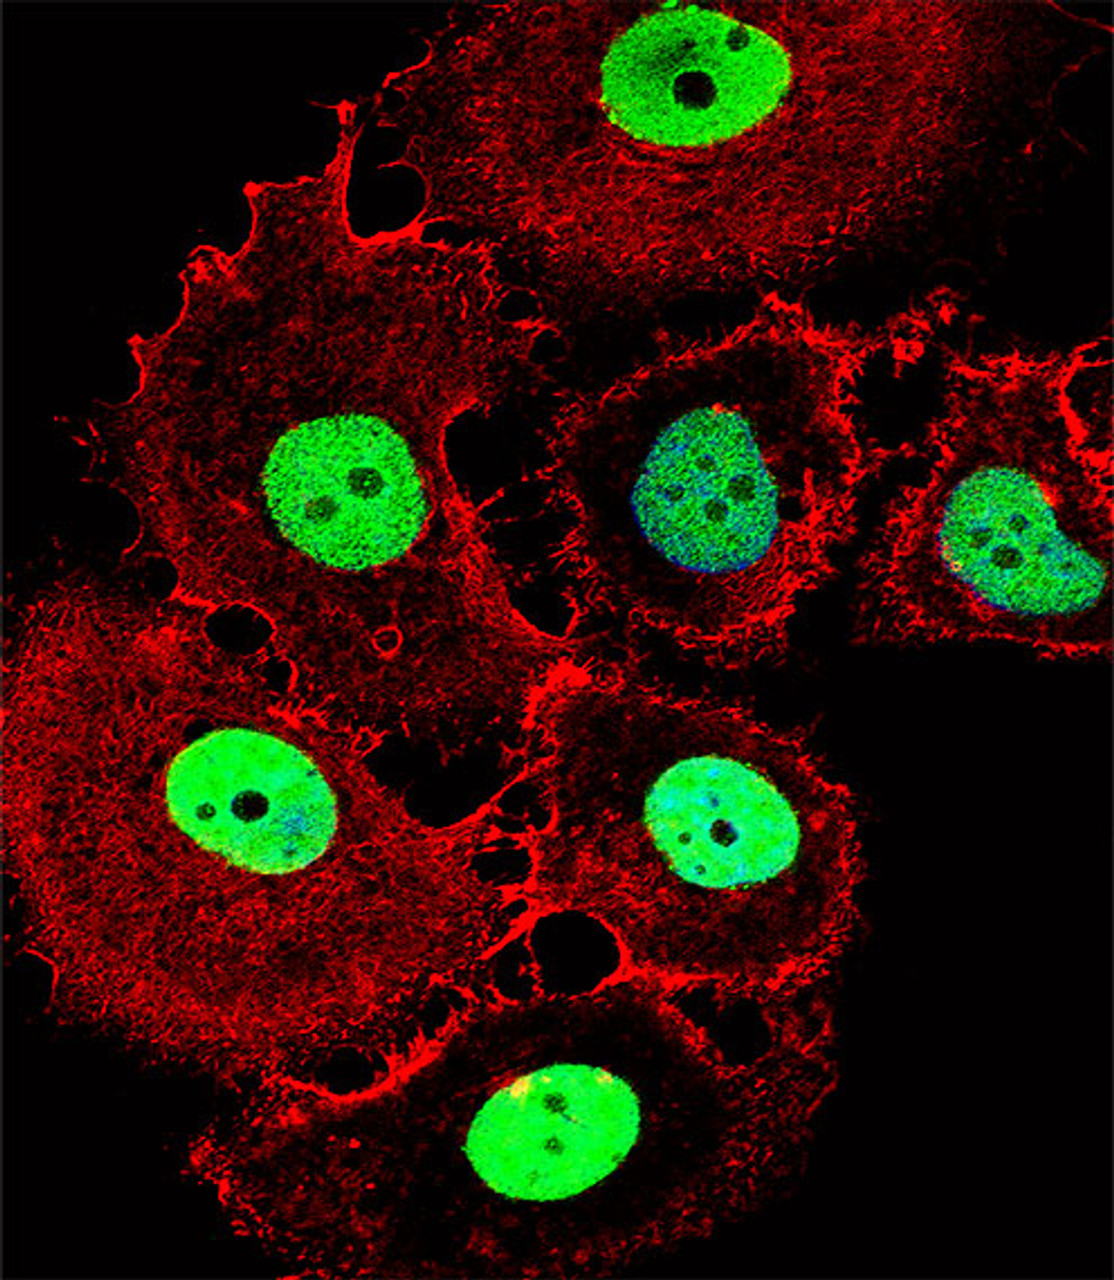 Fluorescent confocal image of MCF-7 cell stained with HOXC10 Antibody .MCF-7 cells were fixed with 4% PFA (20 min) , permeabilized with Triton X-100 (0.1%, 10 min) , then incubated with HOXC10 primary antibody (1:25) . For secondary antibody, Alexa Fluor 488 conjugated donkey anti-rabbit antibody (green) was used (1:400) .Cytoplasmic actin was counterstained with Alexa Fluor 555 (red) conjugated Phalloidin (7units/ml) . Nuclei were counterstained with DAPI (blue) (10 ug/ml, 10 min) . HOXC10 immunoreactivity is localized to Nucleus significantly.